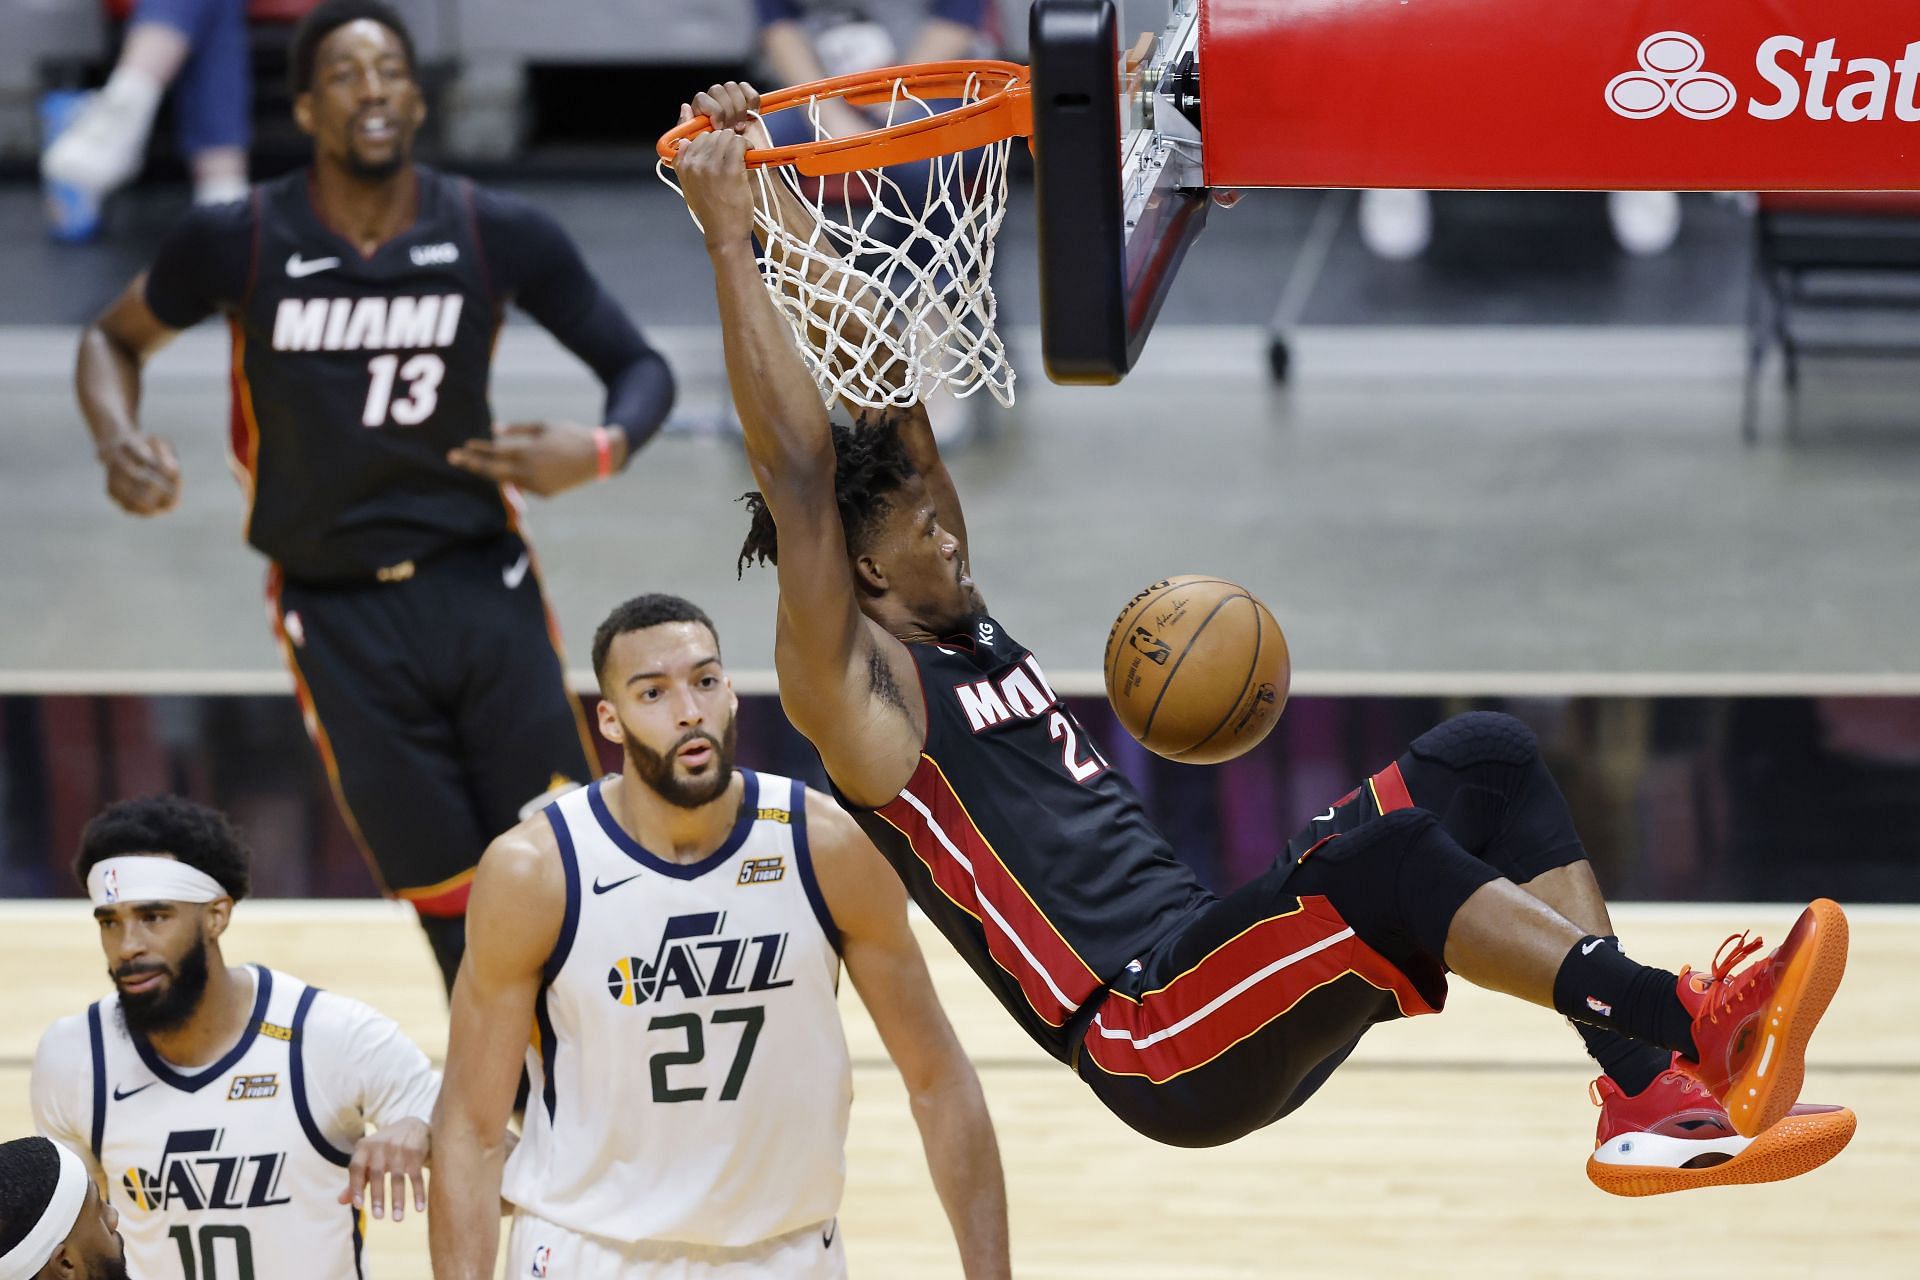 The Miami Heat will host the Utah Jazz for their first meeting of the 2021-22 NBA season